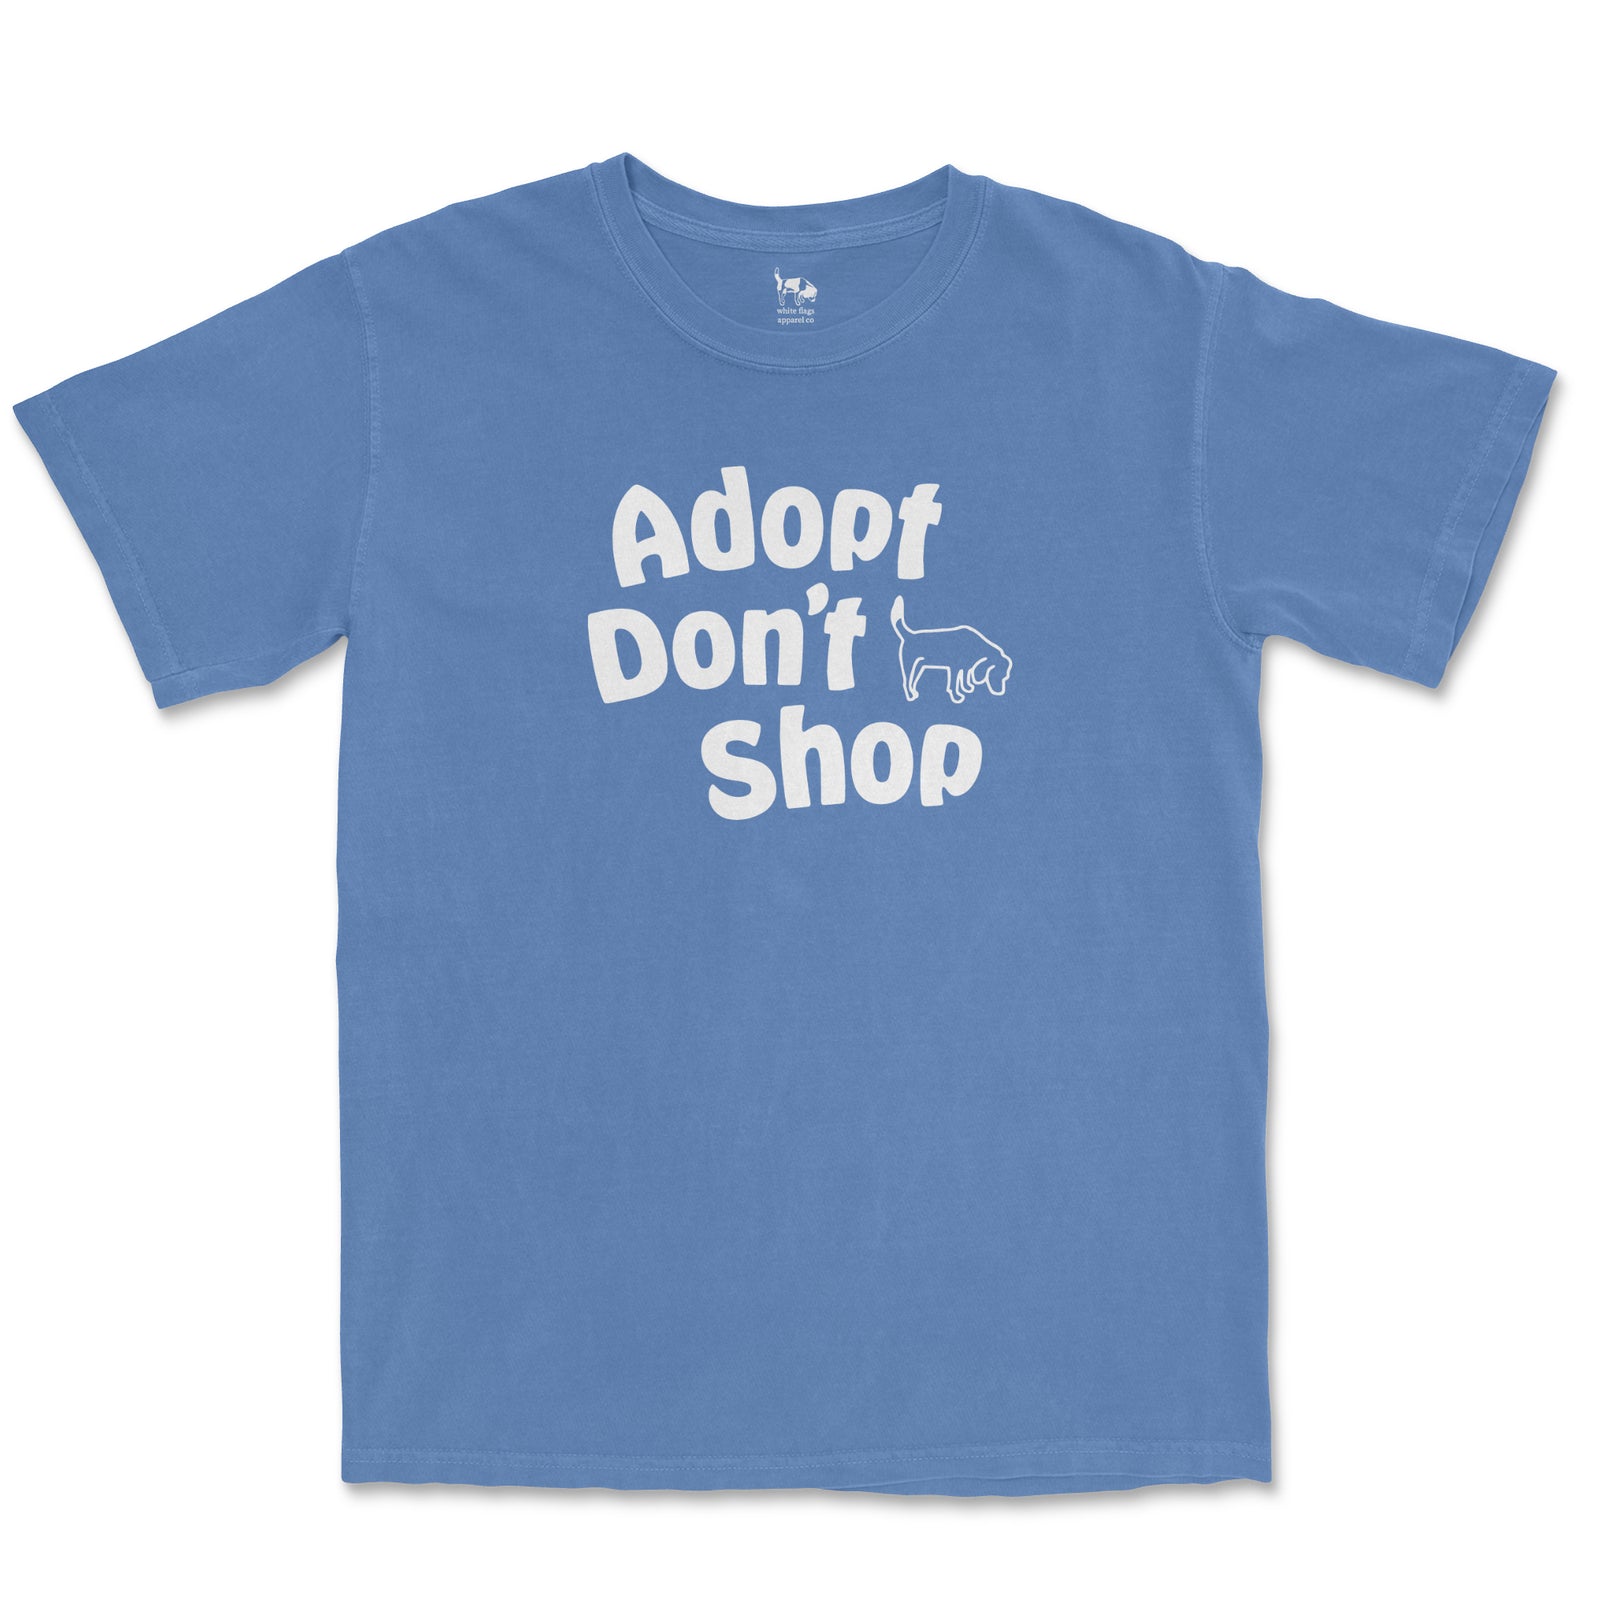 Rescue Tee - Adopt Don't Shop Short Sleeve